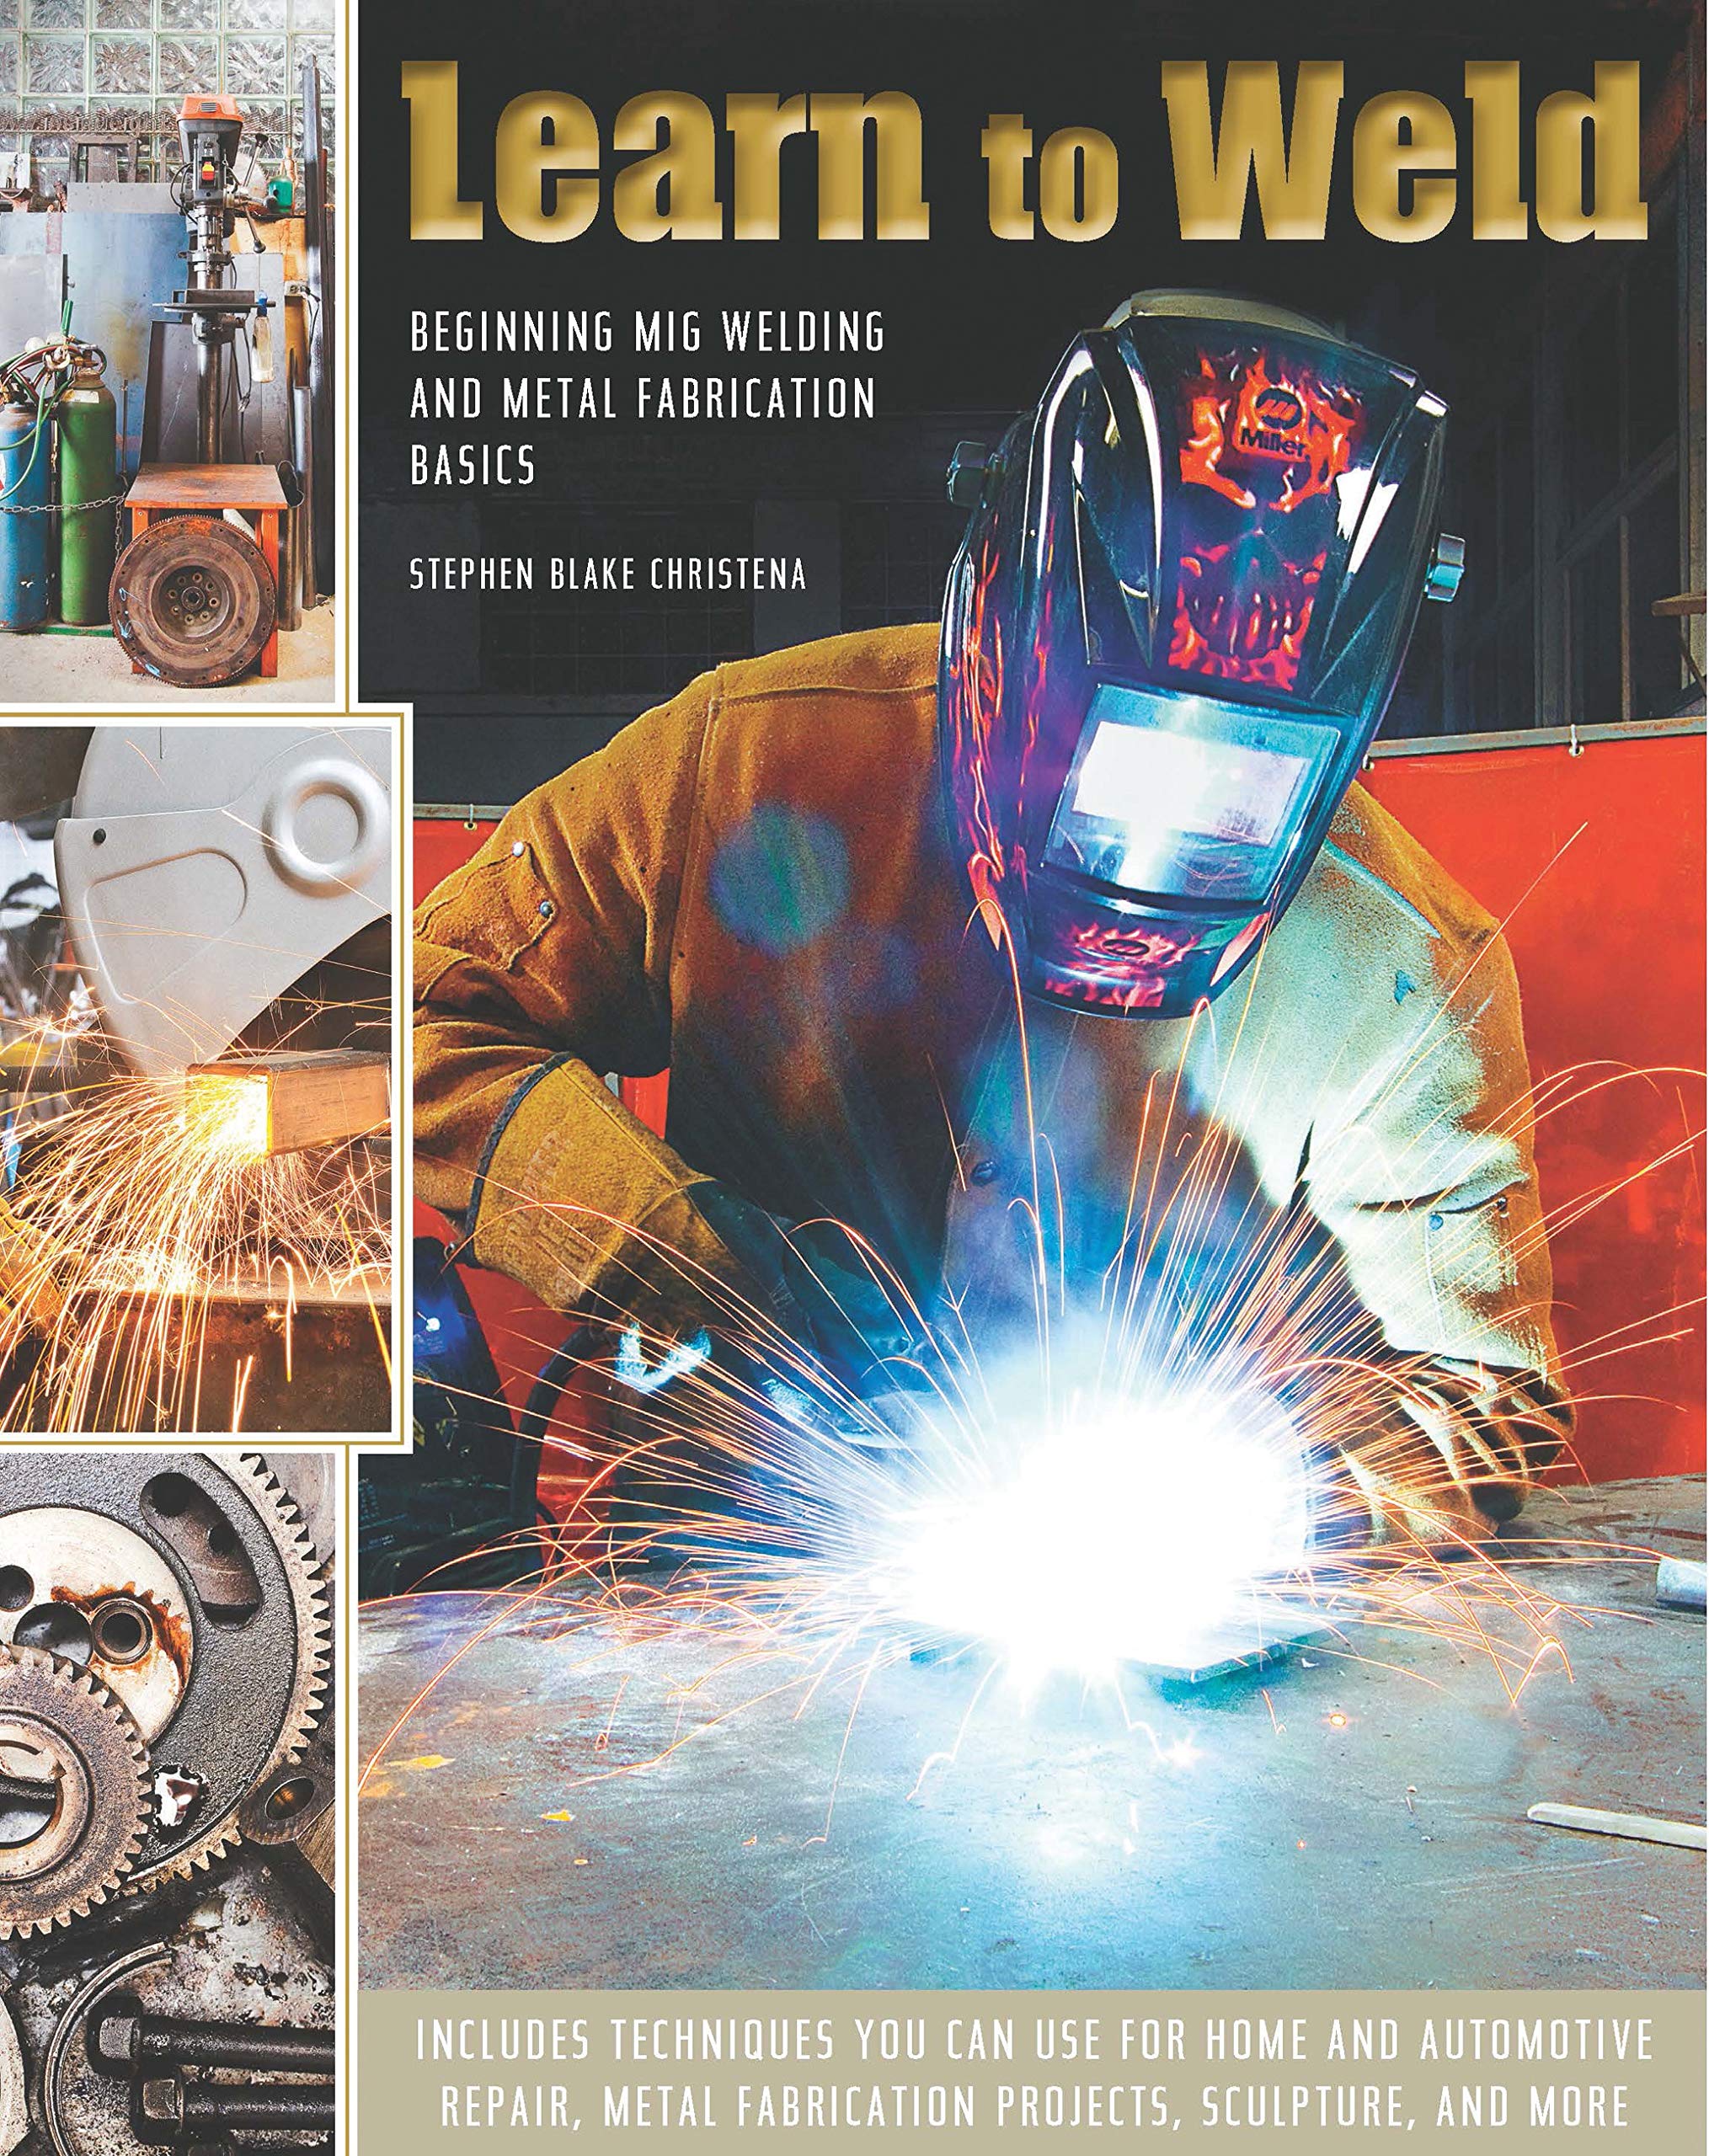  Learn to Weld: Beginning MIG Welding and Metal Fabrication Basics